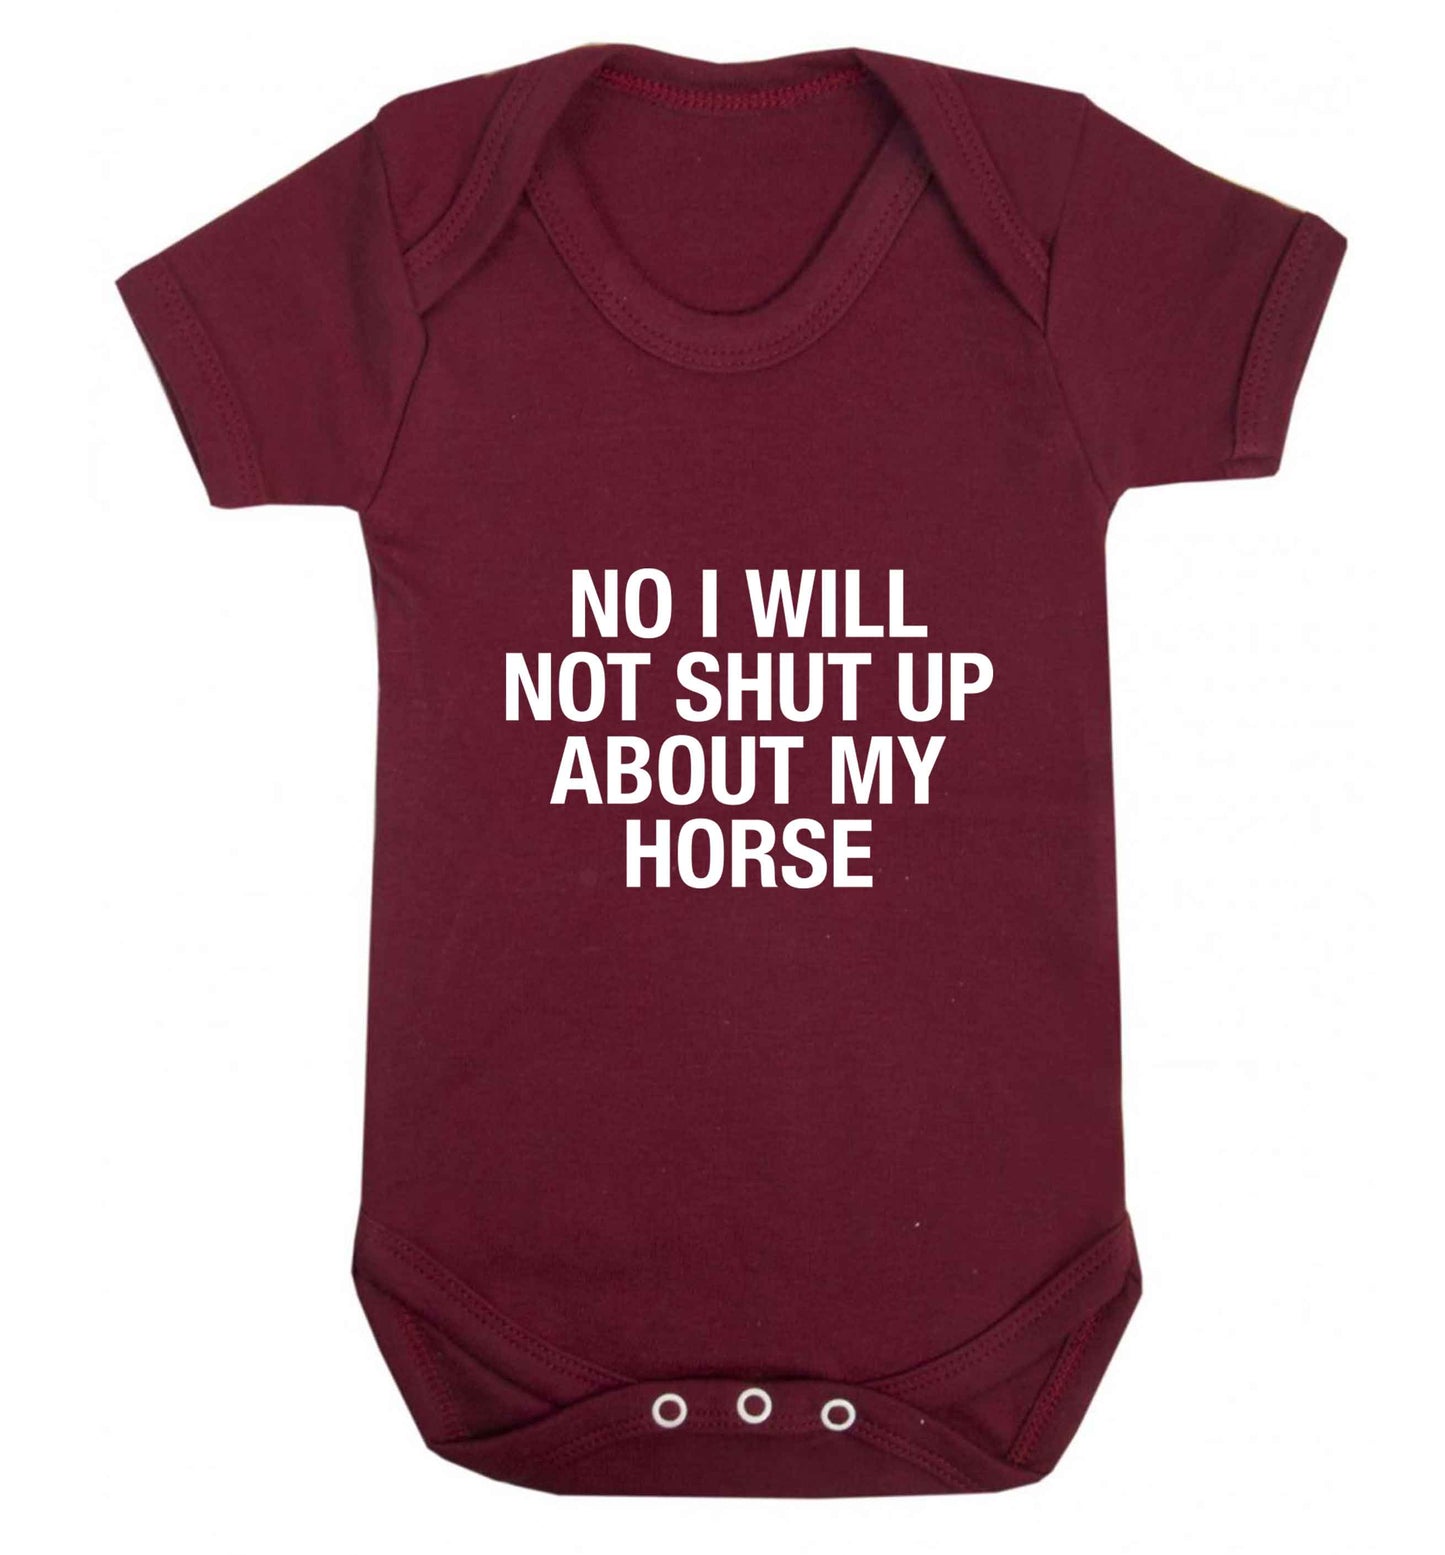 No I will not shut up talking about my horse baby vest maroon 18-24 months